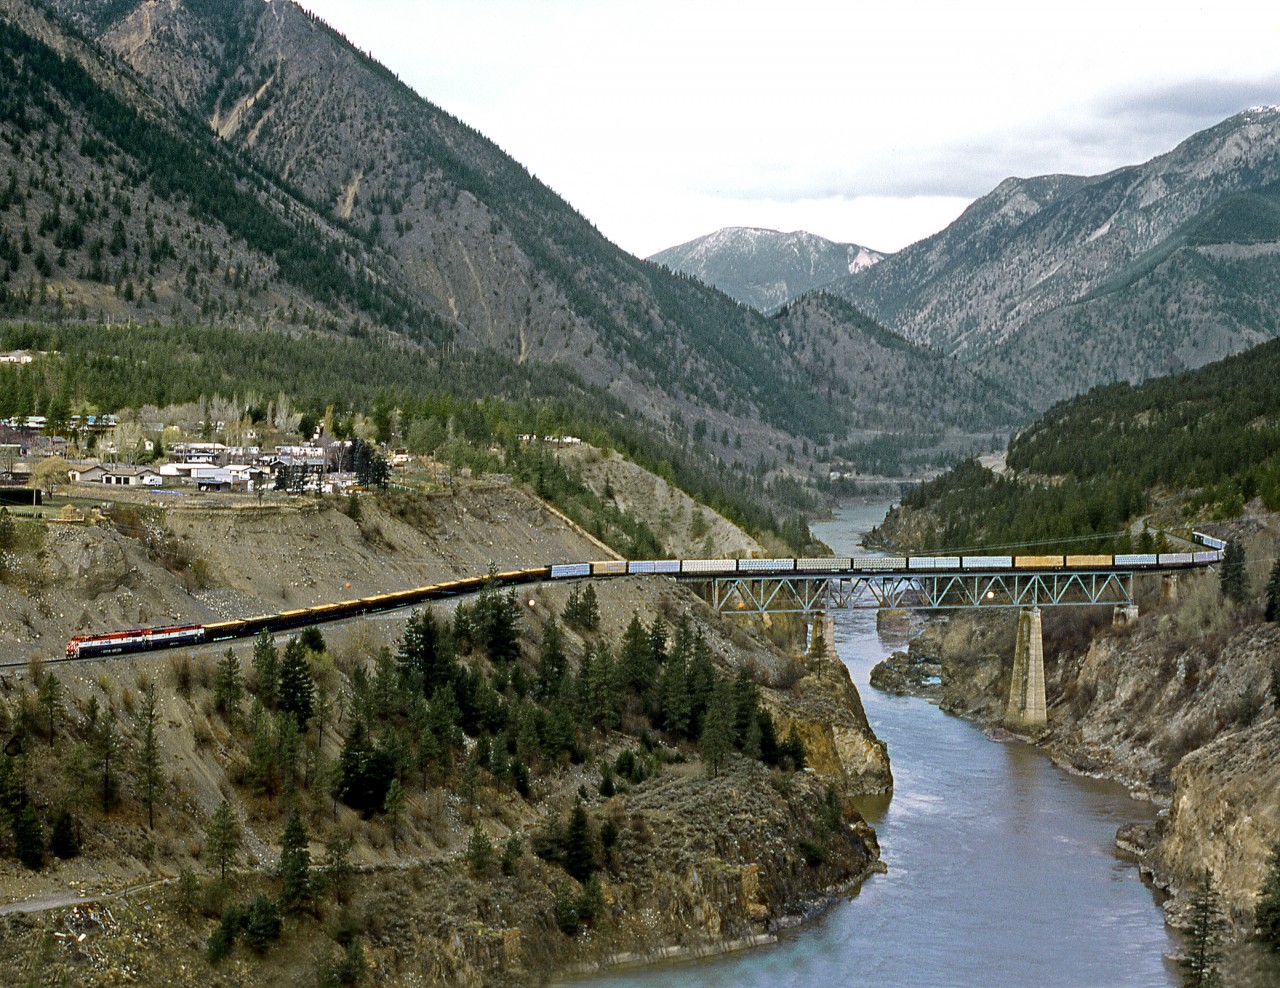 Southbound P-V(Peace-Vancouver) crosses the Fraser River about 2 miles north of the Crew Point at Lillooet. The train has just descended the Fraser Canyon on 20 miles of 2% grade from Kelly Lake